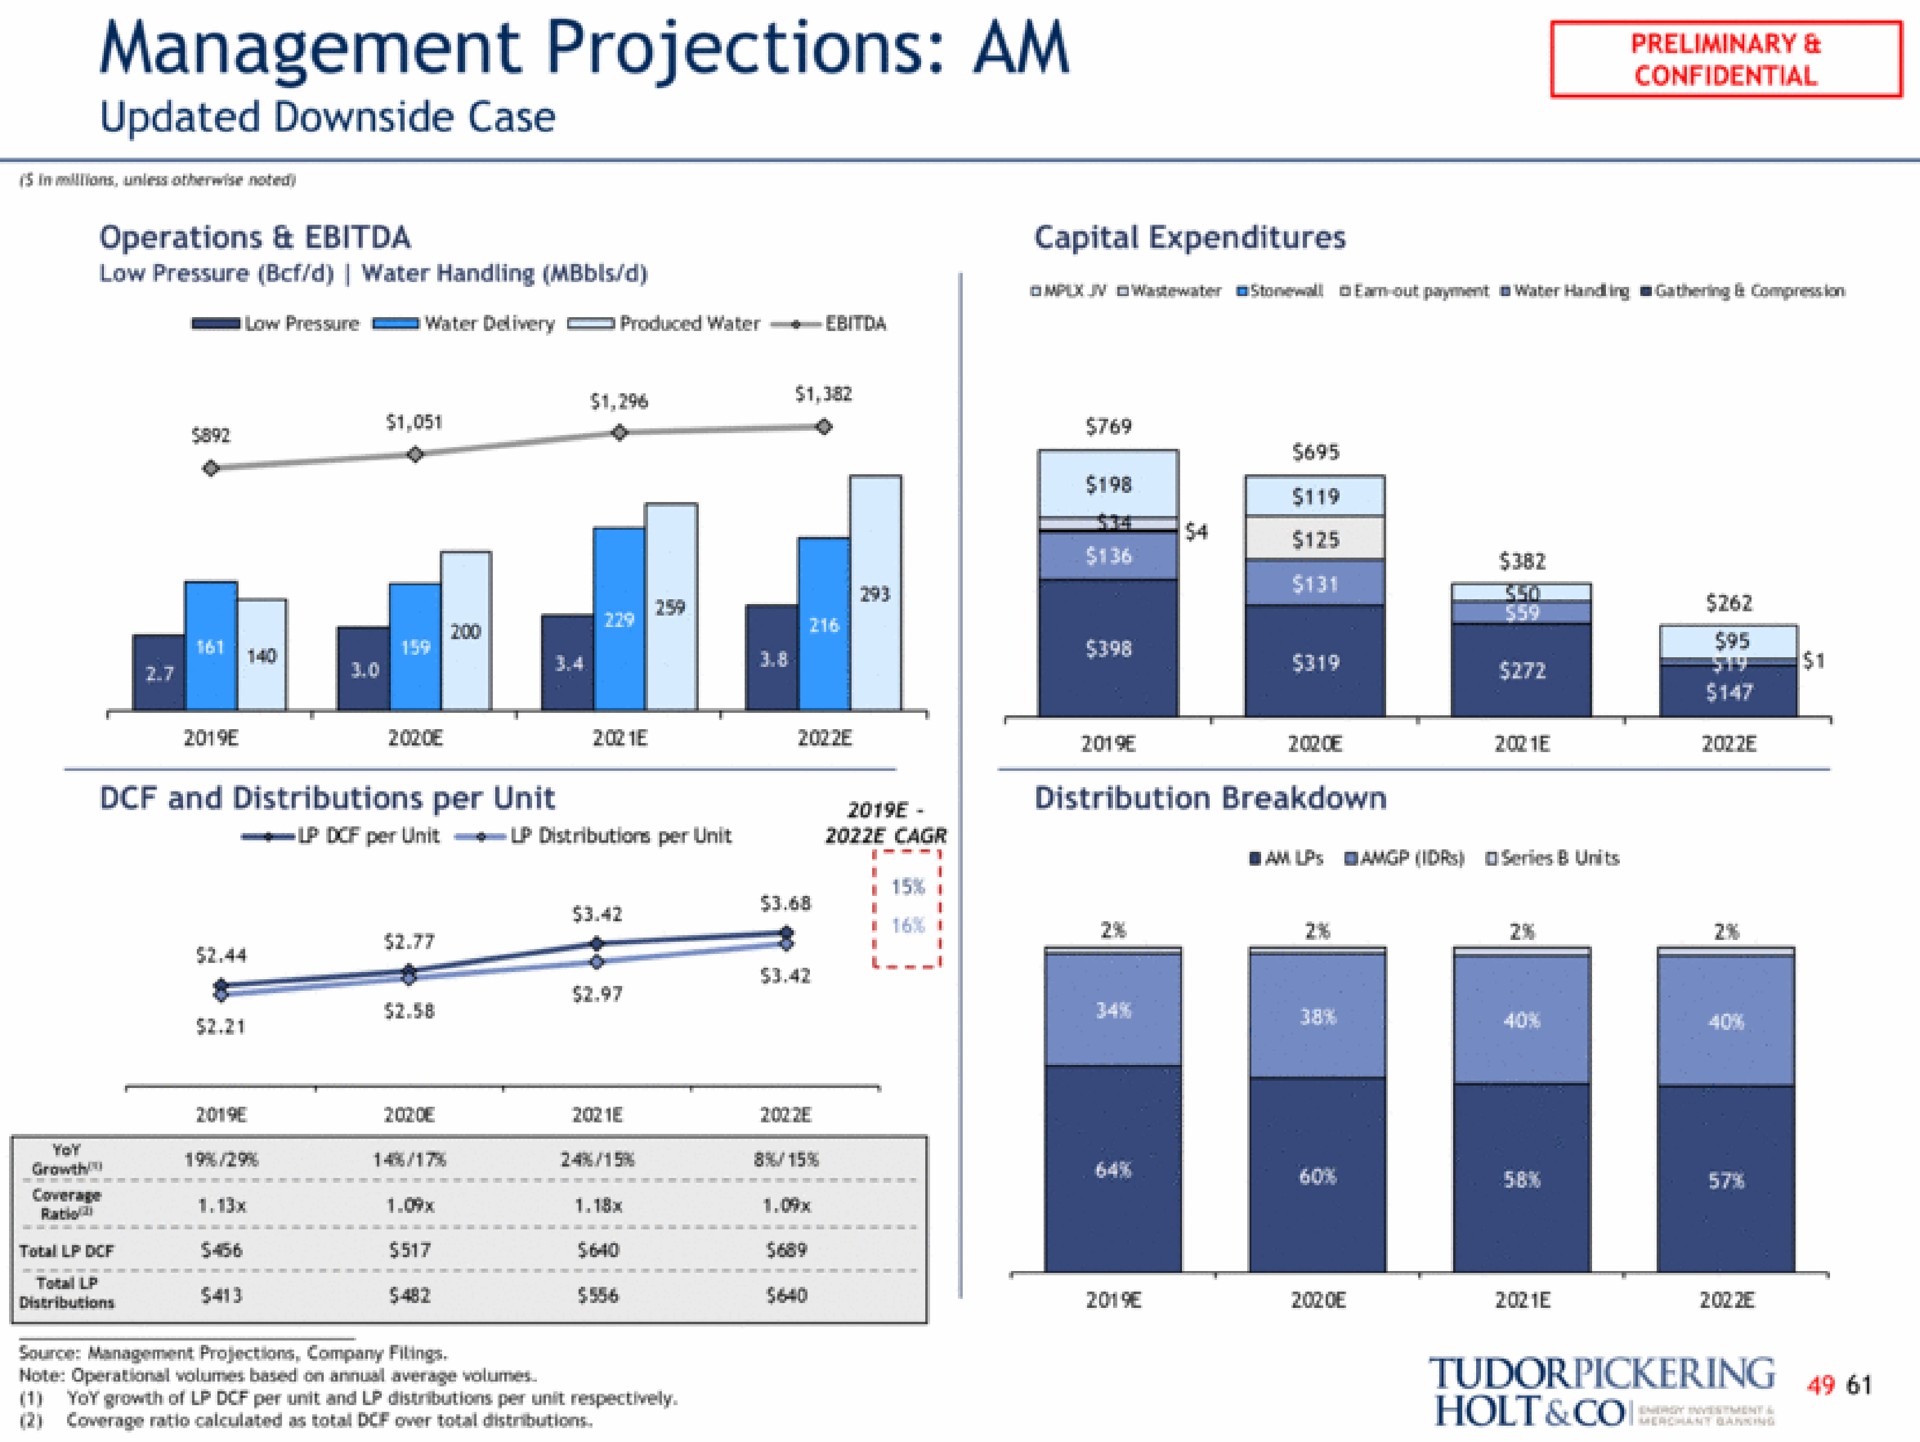 management projections am updated downside case | Tudor, Pickering, Holt & Co